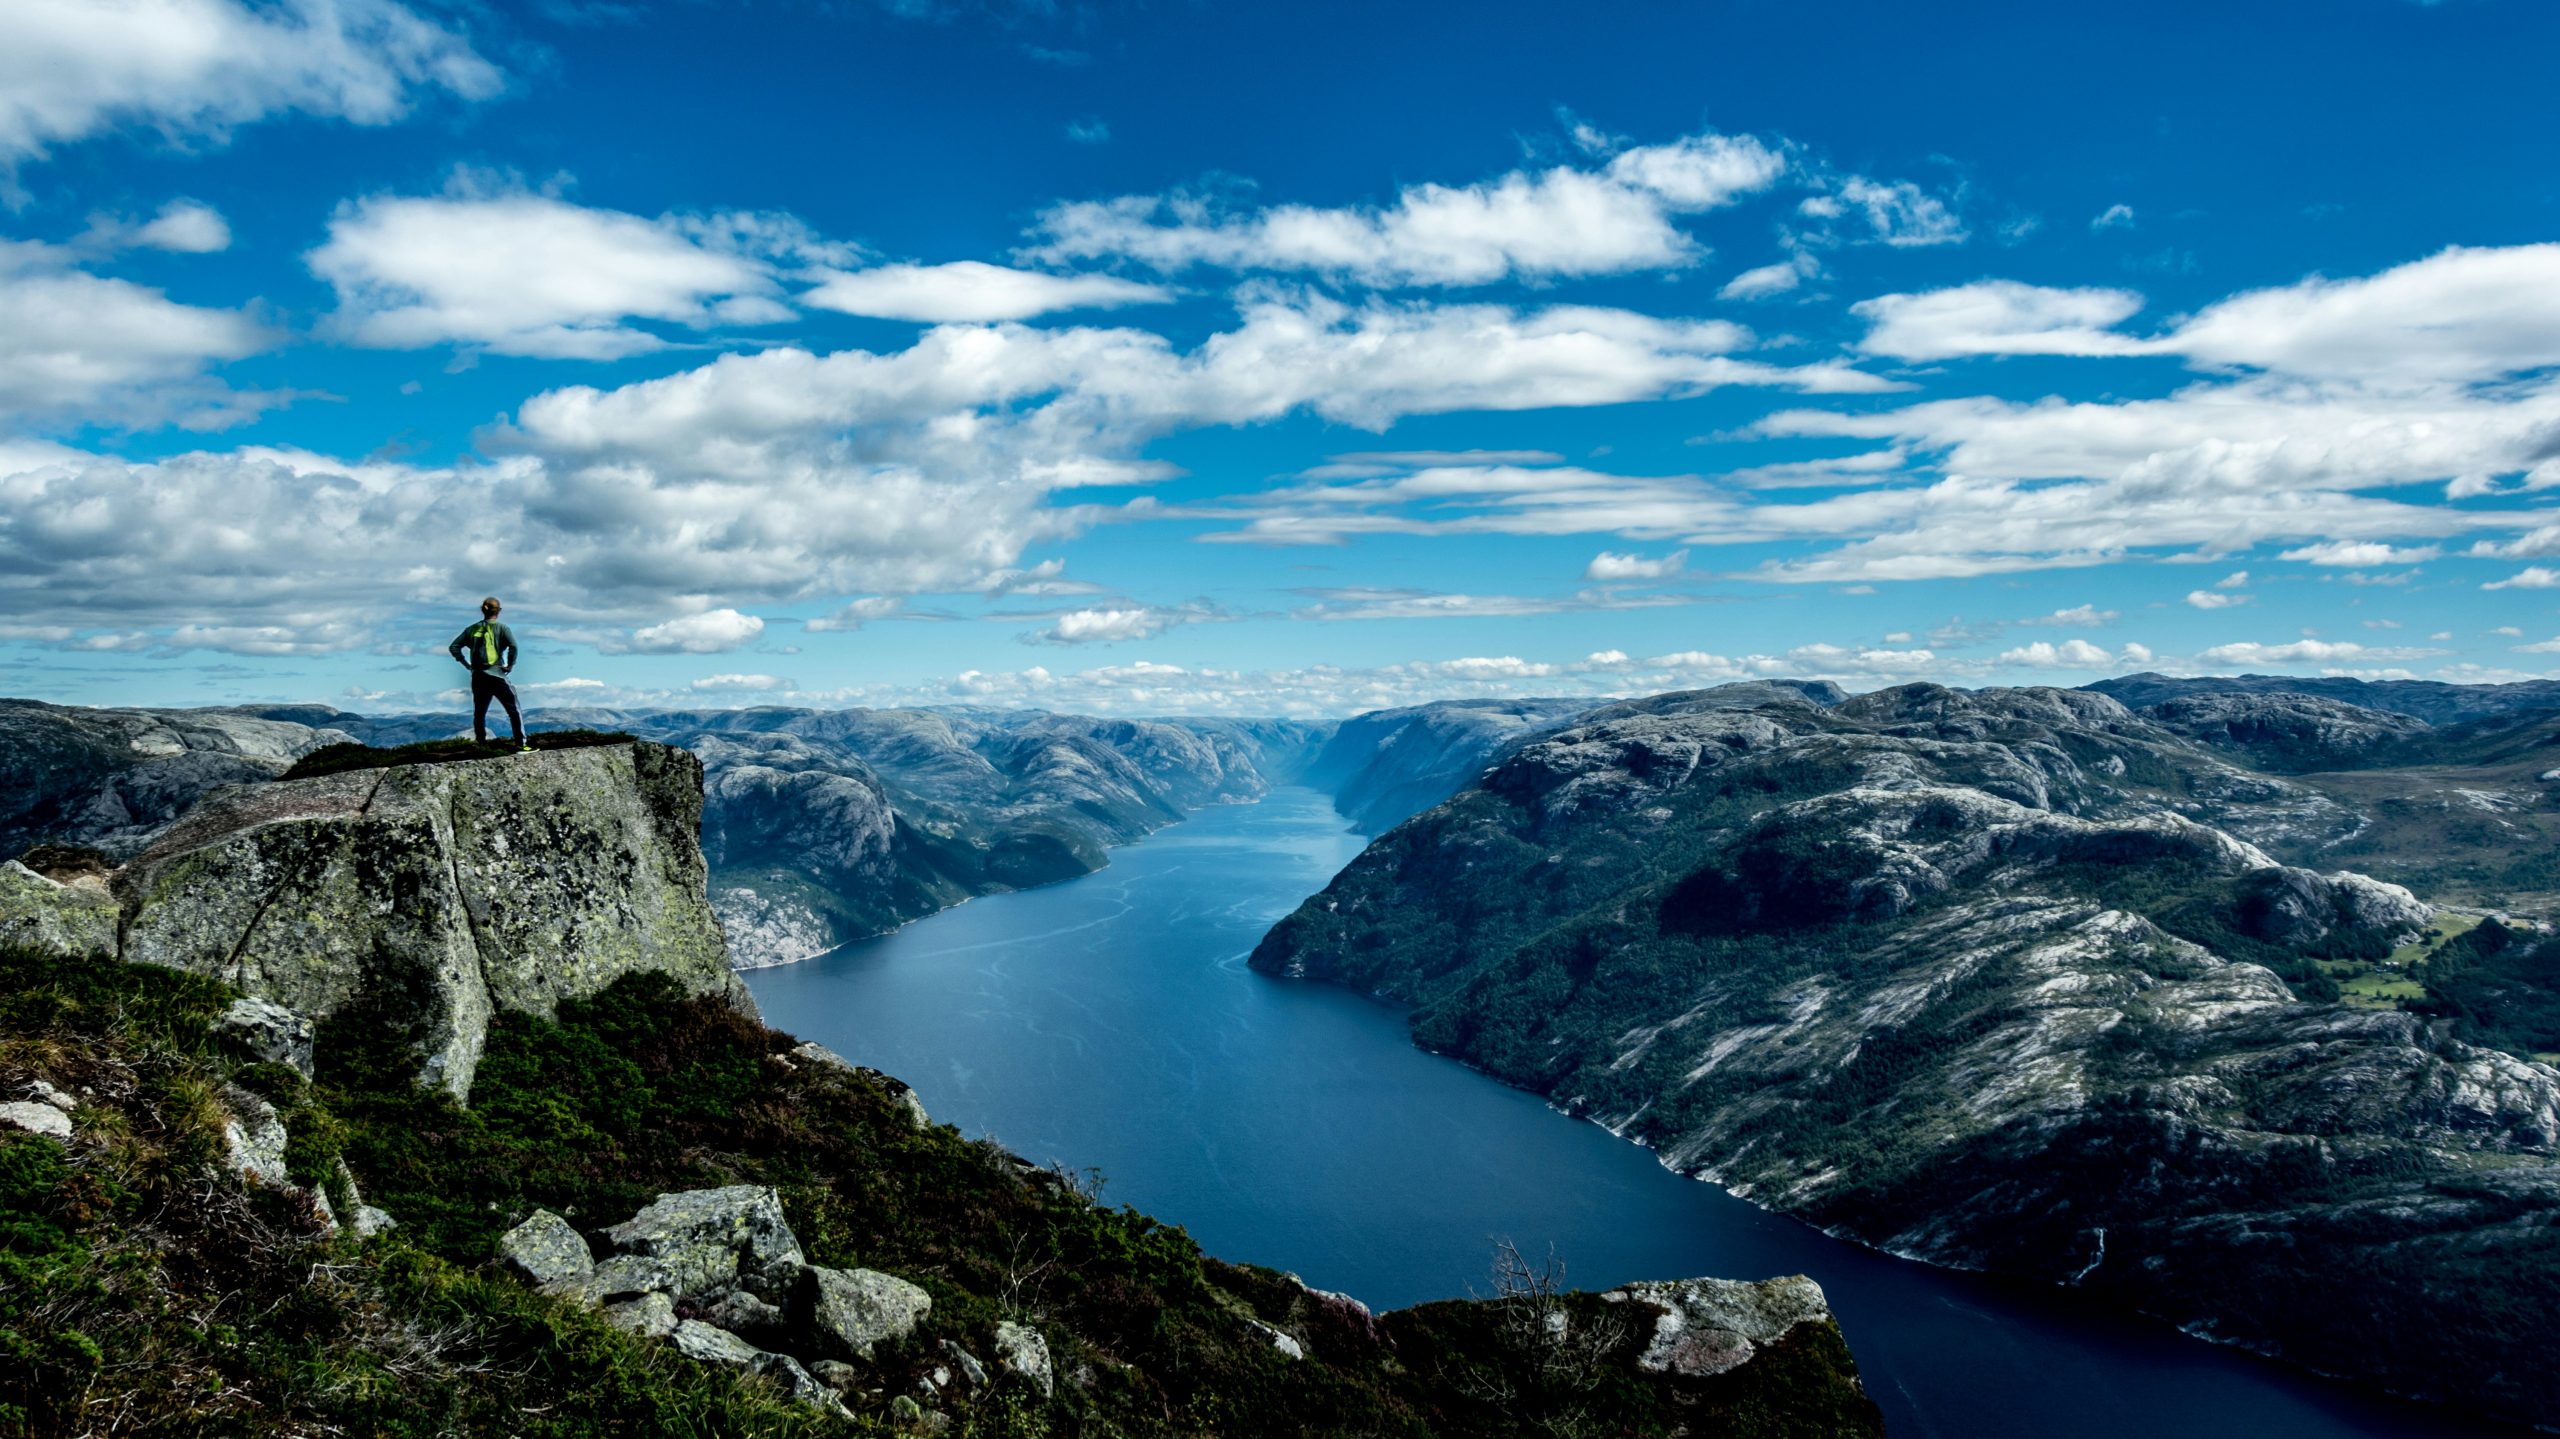 explore the stunning beauty of fjords and immerse yourself in nature's majesty. plan your next adventure to fjords that will leave you in awe.